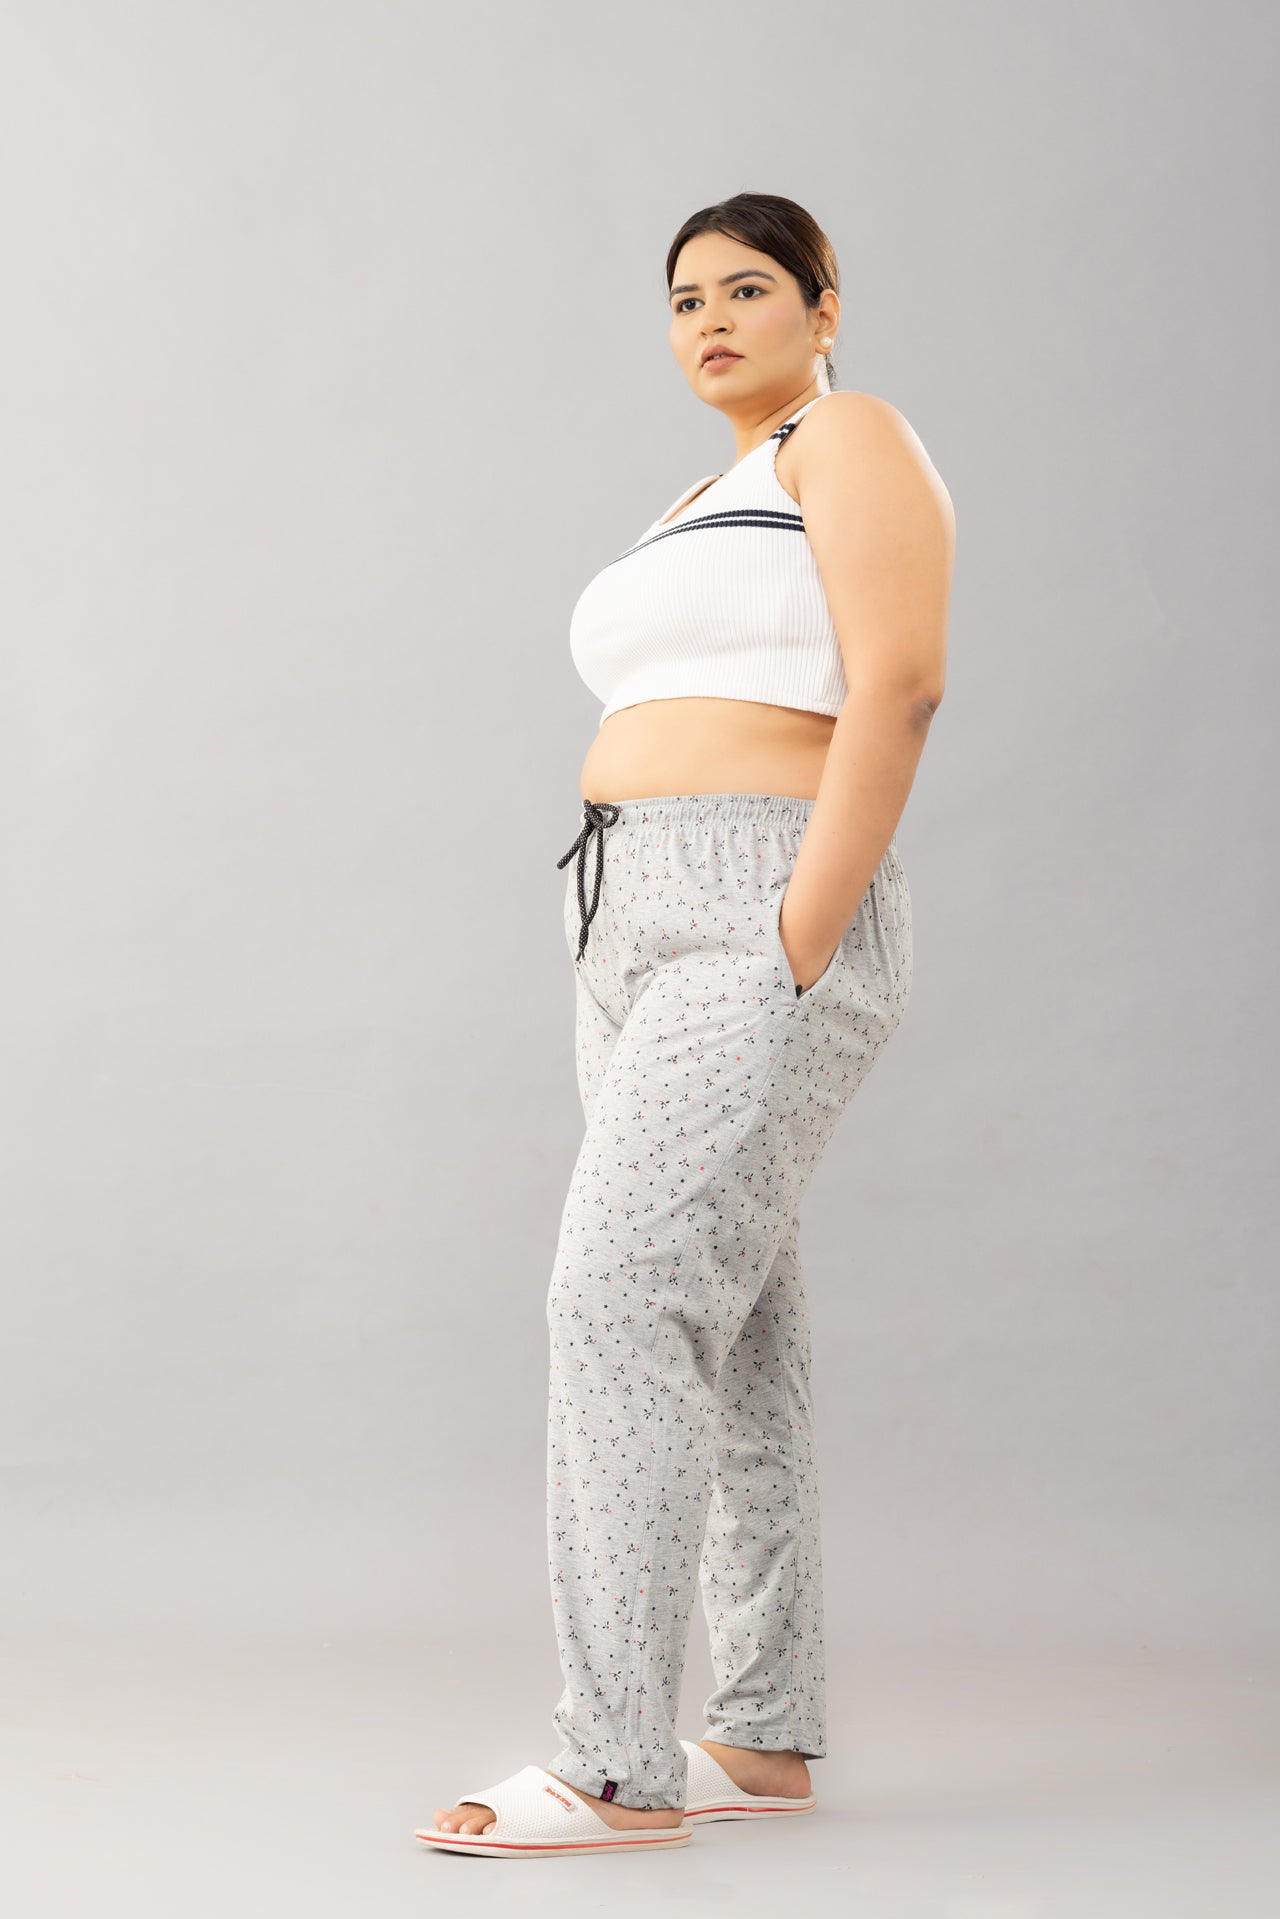 Cotton Printed All Day Night Pants For Women - Grey